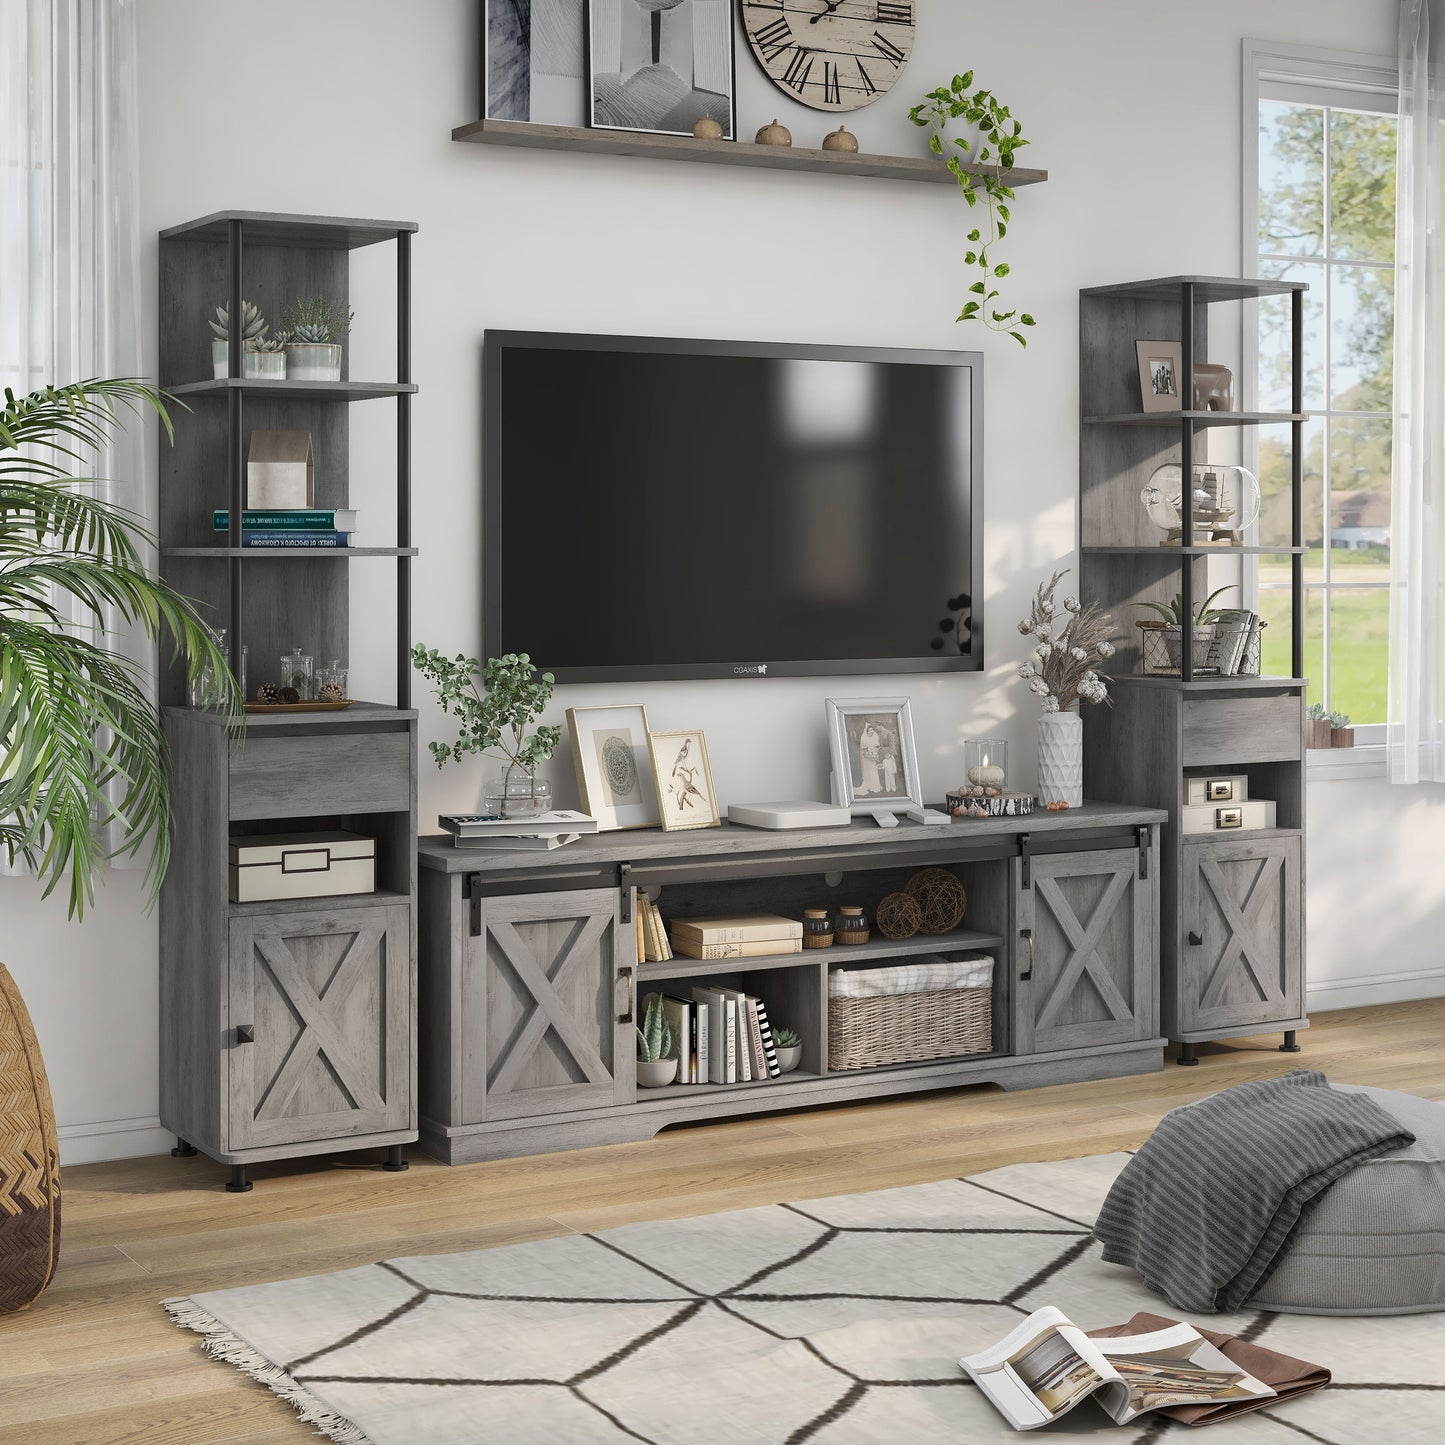 Right angled three-piece rustic vintage gray oak TV stand and pier entertainment set in a living room with accessories